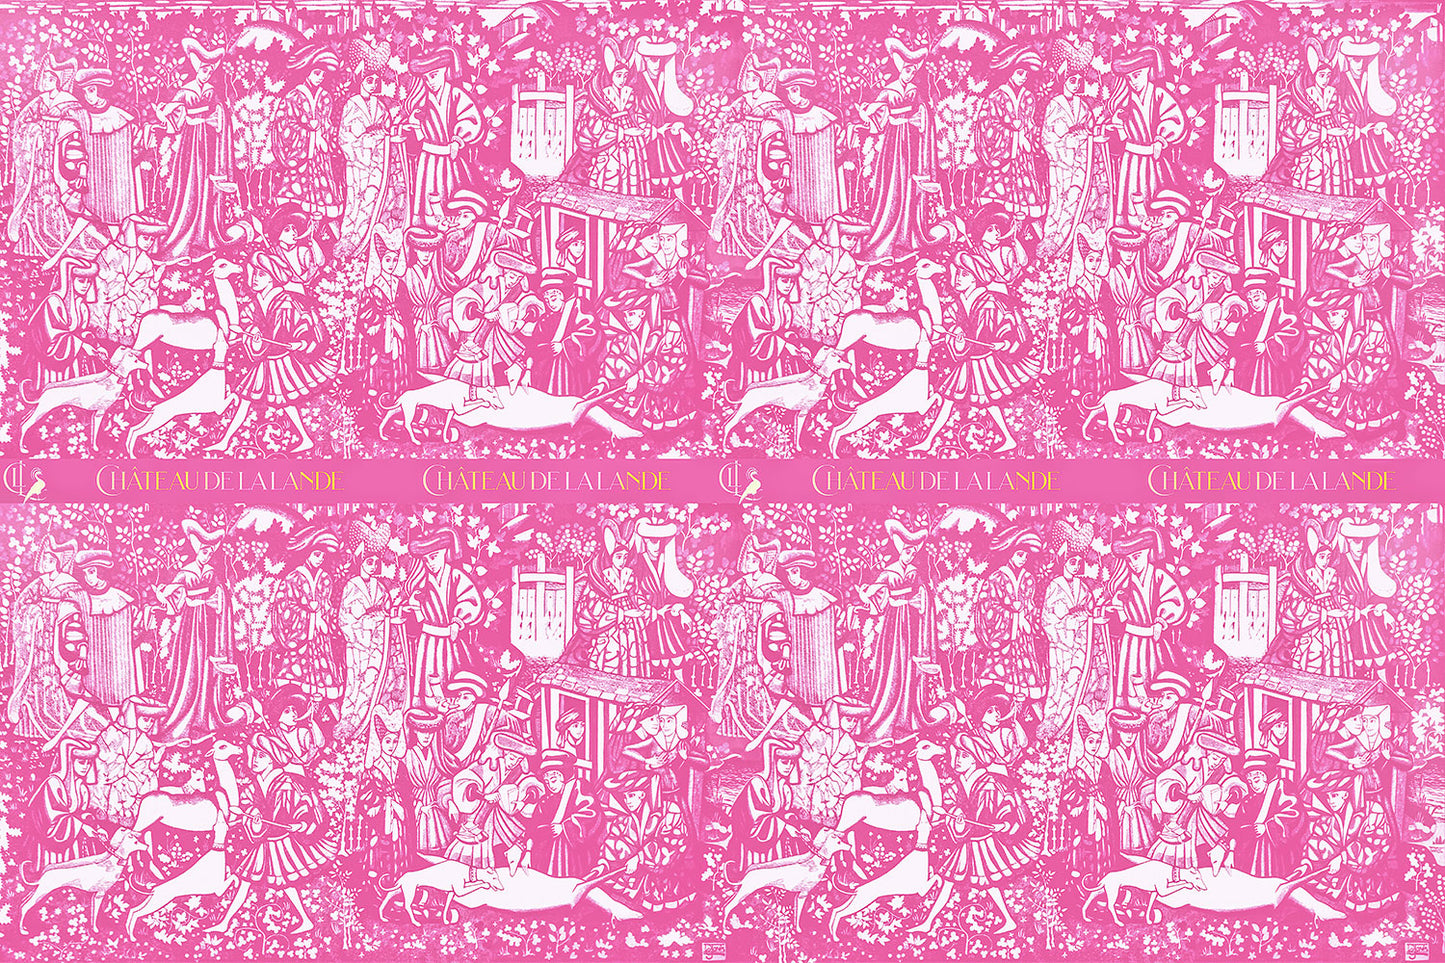 Pretty Tropical Hot Pink Wrapping Paper by castlefield